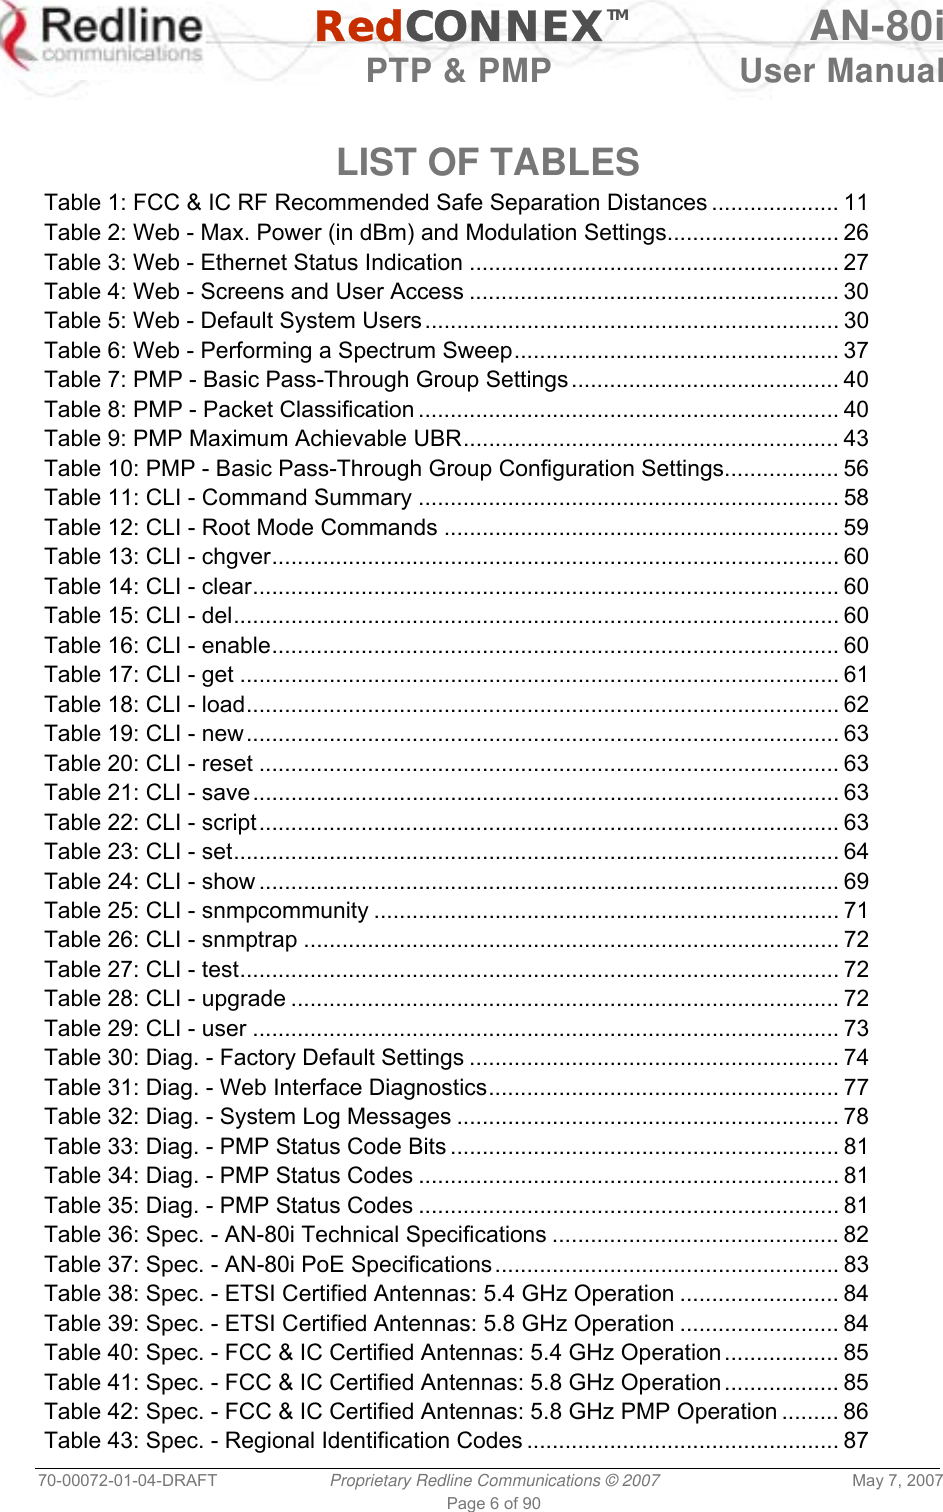   RedCONNEXTM AN-80i   PTP &amp; PMP  User Manual 70-00072-01-04-DRAFT  Proprietary Redline Communications © 2007  May 7, 2007 Page 6 of 90  LIST OF TABLES Table 1: FCC &amp; IC RF Recommended Safe Separation Distances .................... 11 Table 2: Web - Max. Power (in dBm) and Modulation Settings........................... 26 Table 3: Web - Ethernet Status Indication .......................................................... 27 Table 4: Web - Screens and User Access .......................................................... 30 Table 5: Web - Default System Users................................................................. 30 Table 6: Web - Performing a Spectrum Sweep................................................... 37 Table 7: PMP - Basic Pass-Through Group Settings.......................................... 40 Table 8: PMP - Packet Classification .................................................................. 40 Table 9: PMP Maximum Achievable UBR........................................................... 43 Table 10: PMP - Basic Pass-Through Group Configuration Settings.................. 56 Table 11: CLI - Command Summary .................................................................. 58 Table 12: CLI - Root Mode Commands .............................................................. 59 Table 13: CLI - chgver......................................................................................... 60 Table 14: CLI - clear............................................................................................ 60 Table 15: CLI - del............................................................................................... 60 Table 16: CLI - enable......................................................................................... 60 Table 17: CLI - get .............................................................................................. 61 Table 18: CLI - load............................................................................................. 62 Table 19: CLI - new............................................................................................. 63 Table 20: CLI - reset ........................................................................................... 63 Table 21: CLI - save............................................................................................ 63 Table 22: CLI - script........................................................................................... 63 Table 23: CLI - set............................................................................................... 64 Table 24: CLI - show ........................................................................................... 69 Table 25: CLI - snmpcommunity ......................................................................... 71 Table 26: CLI - snmptrap .................................................................................... 72 Table 27: CLI - test.............................................................................................. 72 Table 28: CLI - upgrade ...................................................................................... 72 Table 29: CLI - user ............................................................................................ 73 Table 30: Diag. - Factory Default Settings .......................................................... 74 Table 31: Diag. - Web Interface Diagnostics....................................................... 77 Table 32: Diag. - System Log Messages ............................................................ 78 Table 33: Diag. - PMP Status Code Bits ............................................................. 81 Table 34: Diag. - PMP Status Codes .................................................................. 81 Table 35: Diag. - PMP Status Codes .................................................................. 81 Table 36: Spec. - AN-80i Technical Specifications ............................................. 82 Table 37: Spec. - AN-80i PoE Specifications...................................................... 83 Table 38: Spec. - ETSI Certified Antennas: 5.4 GHz Operation ......................... 84 Table 39: Spec. - ETSI Certified Antennas: 5.8 GHz Operation ......................... 84 Table 40: Spec. - FCC &amp; IC Certified Antennas: 5.4 GHz Operation.................. 85 Table 41: Spec. - FCC &amp; IC Certified Antennas: 5.8 GHz Operation.................. 85 Table 42: Spec. - FCC &amp; IC Certified Antennas: 5.8 GHz PMP Operation ......... 86 Table 43: Spec. - Regional Identification Codes ................................................. 87 